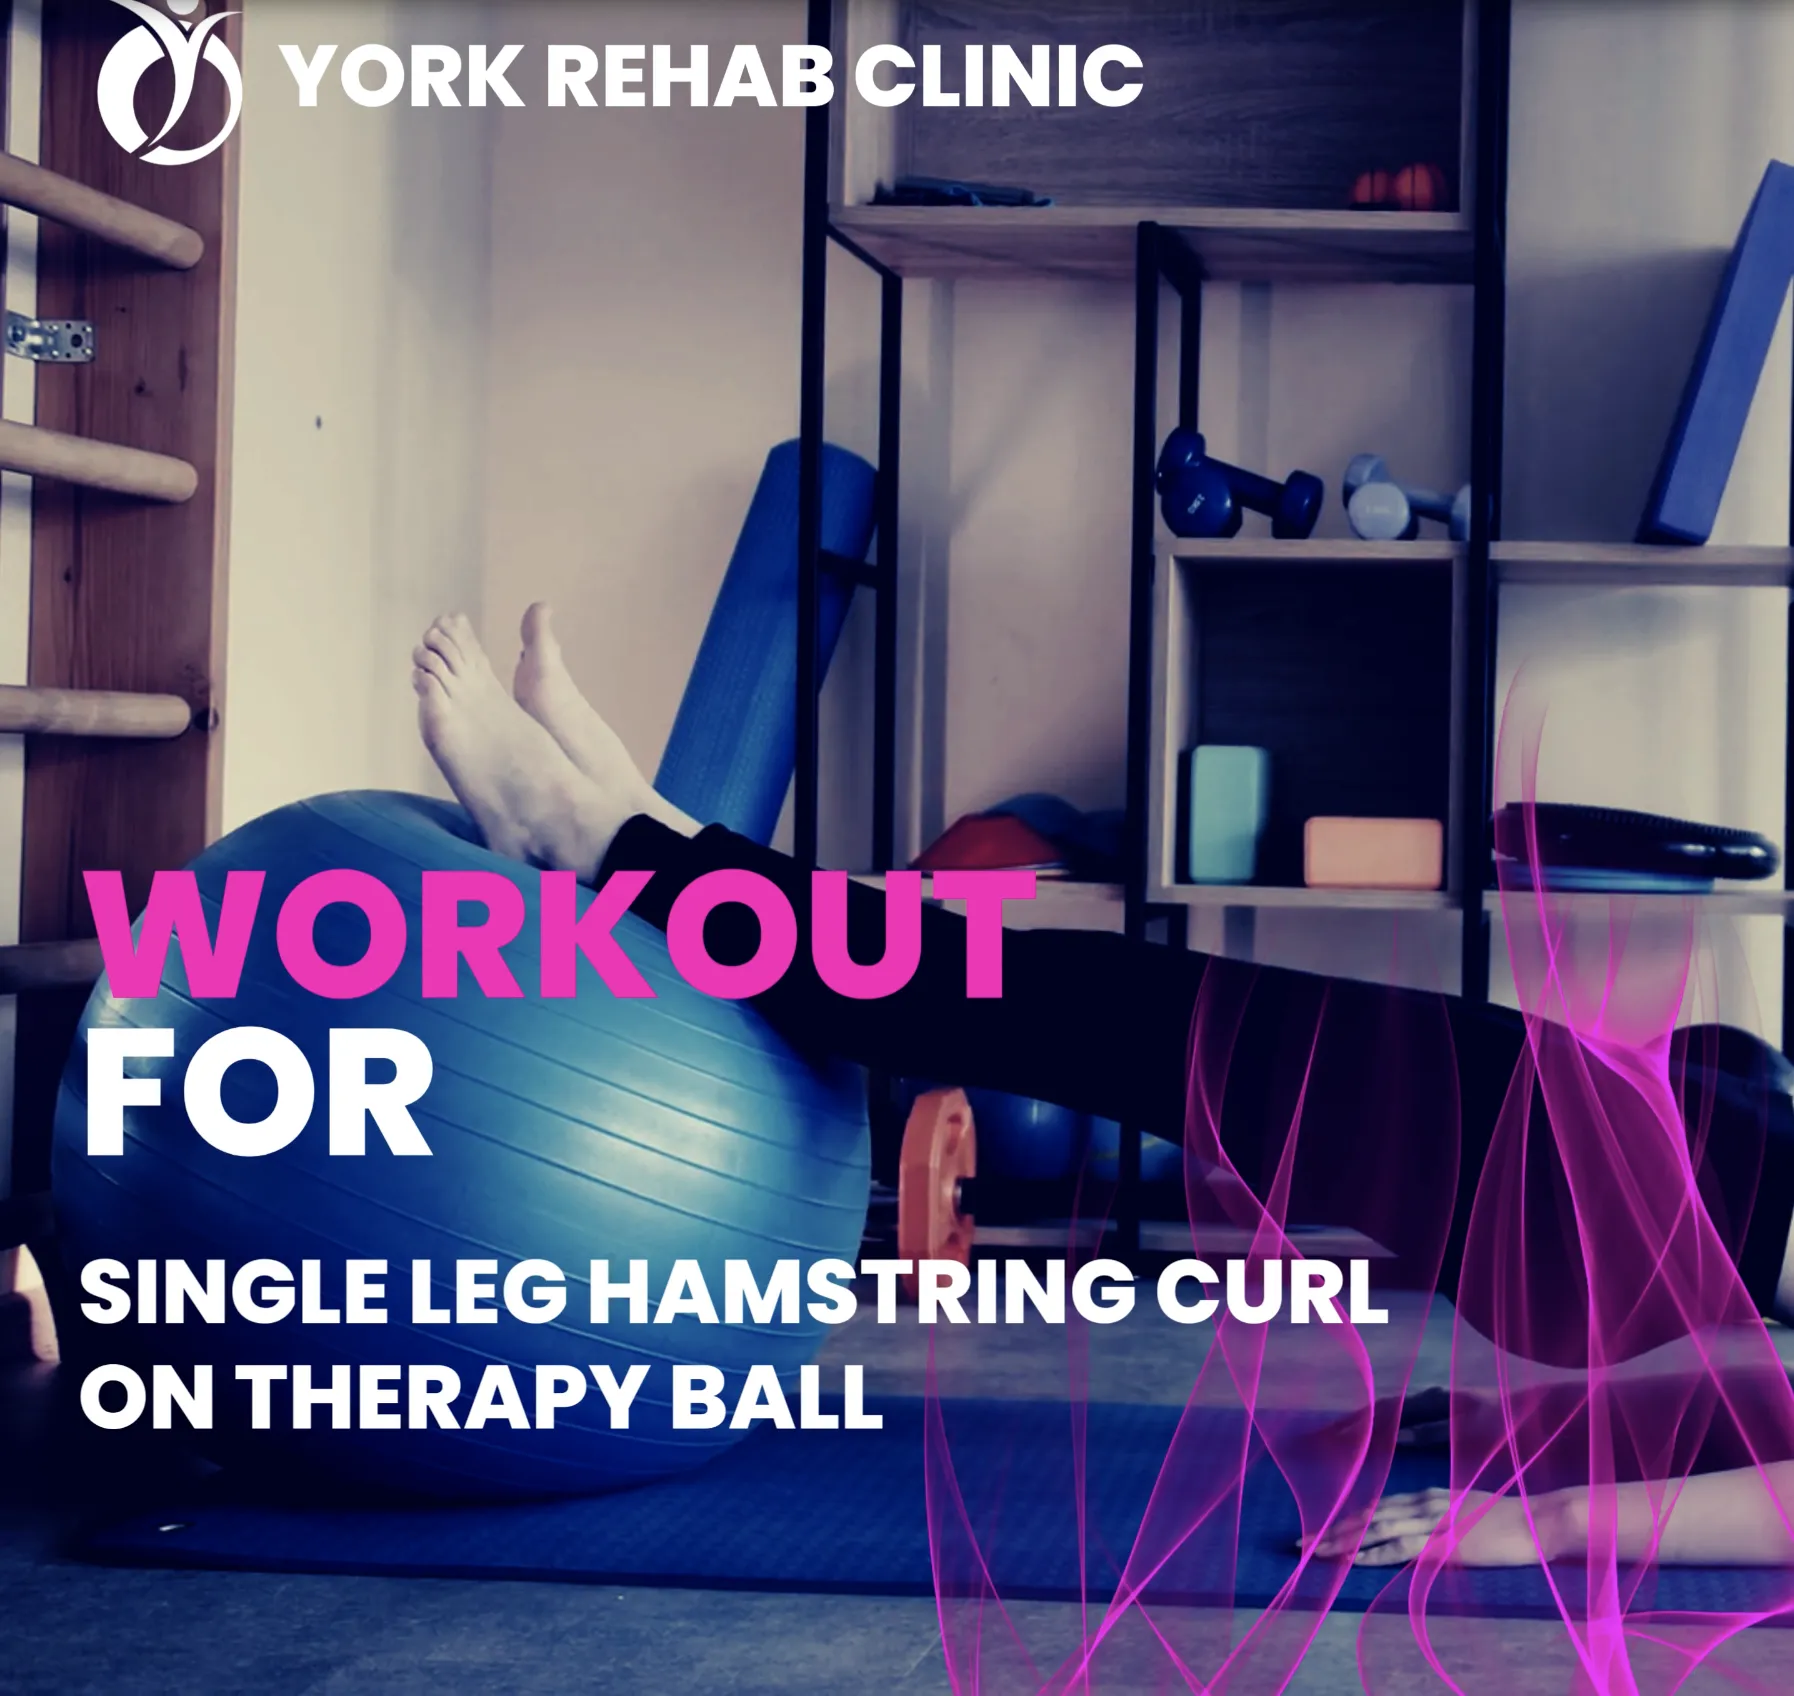 Strengthen Quads with Standing Quad Stretch – Try Now!